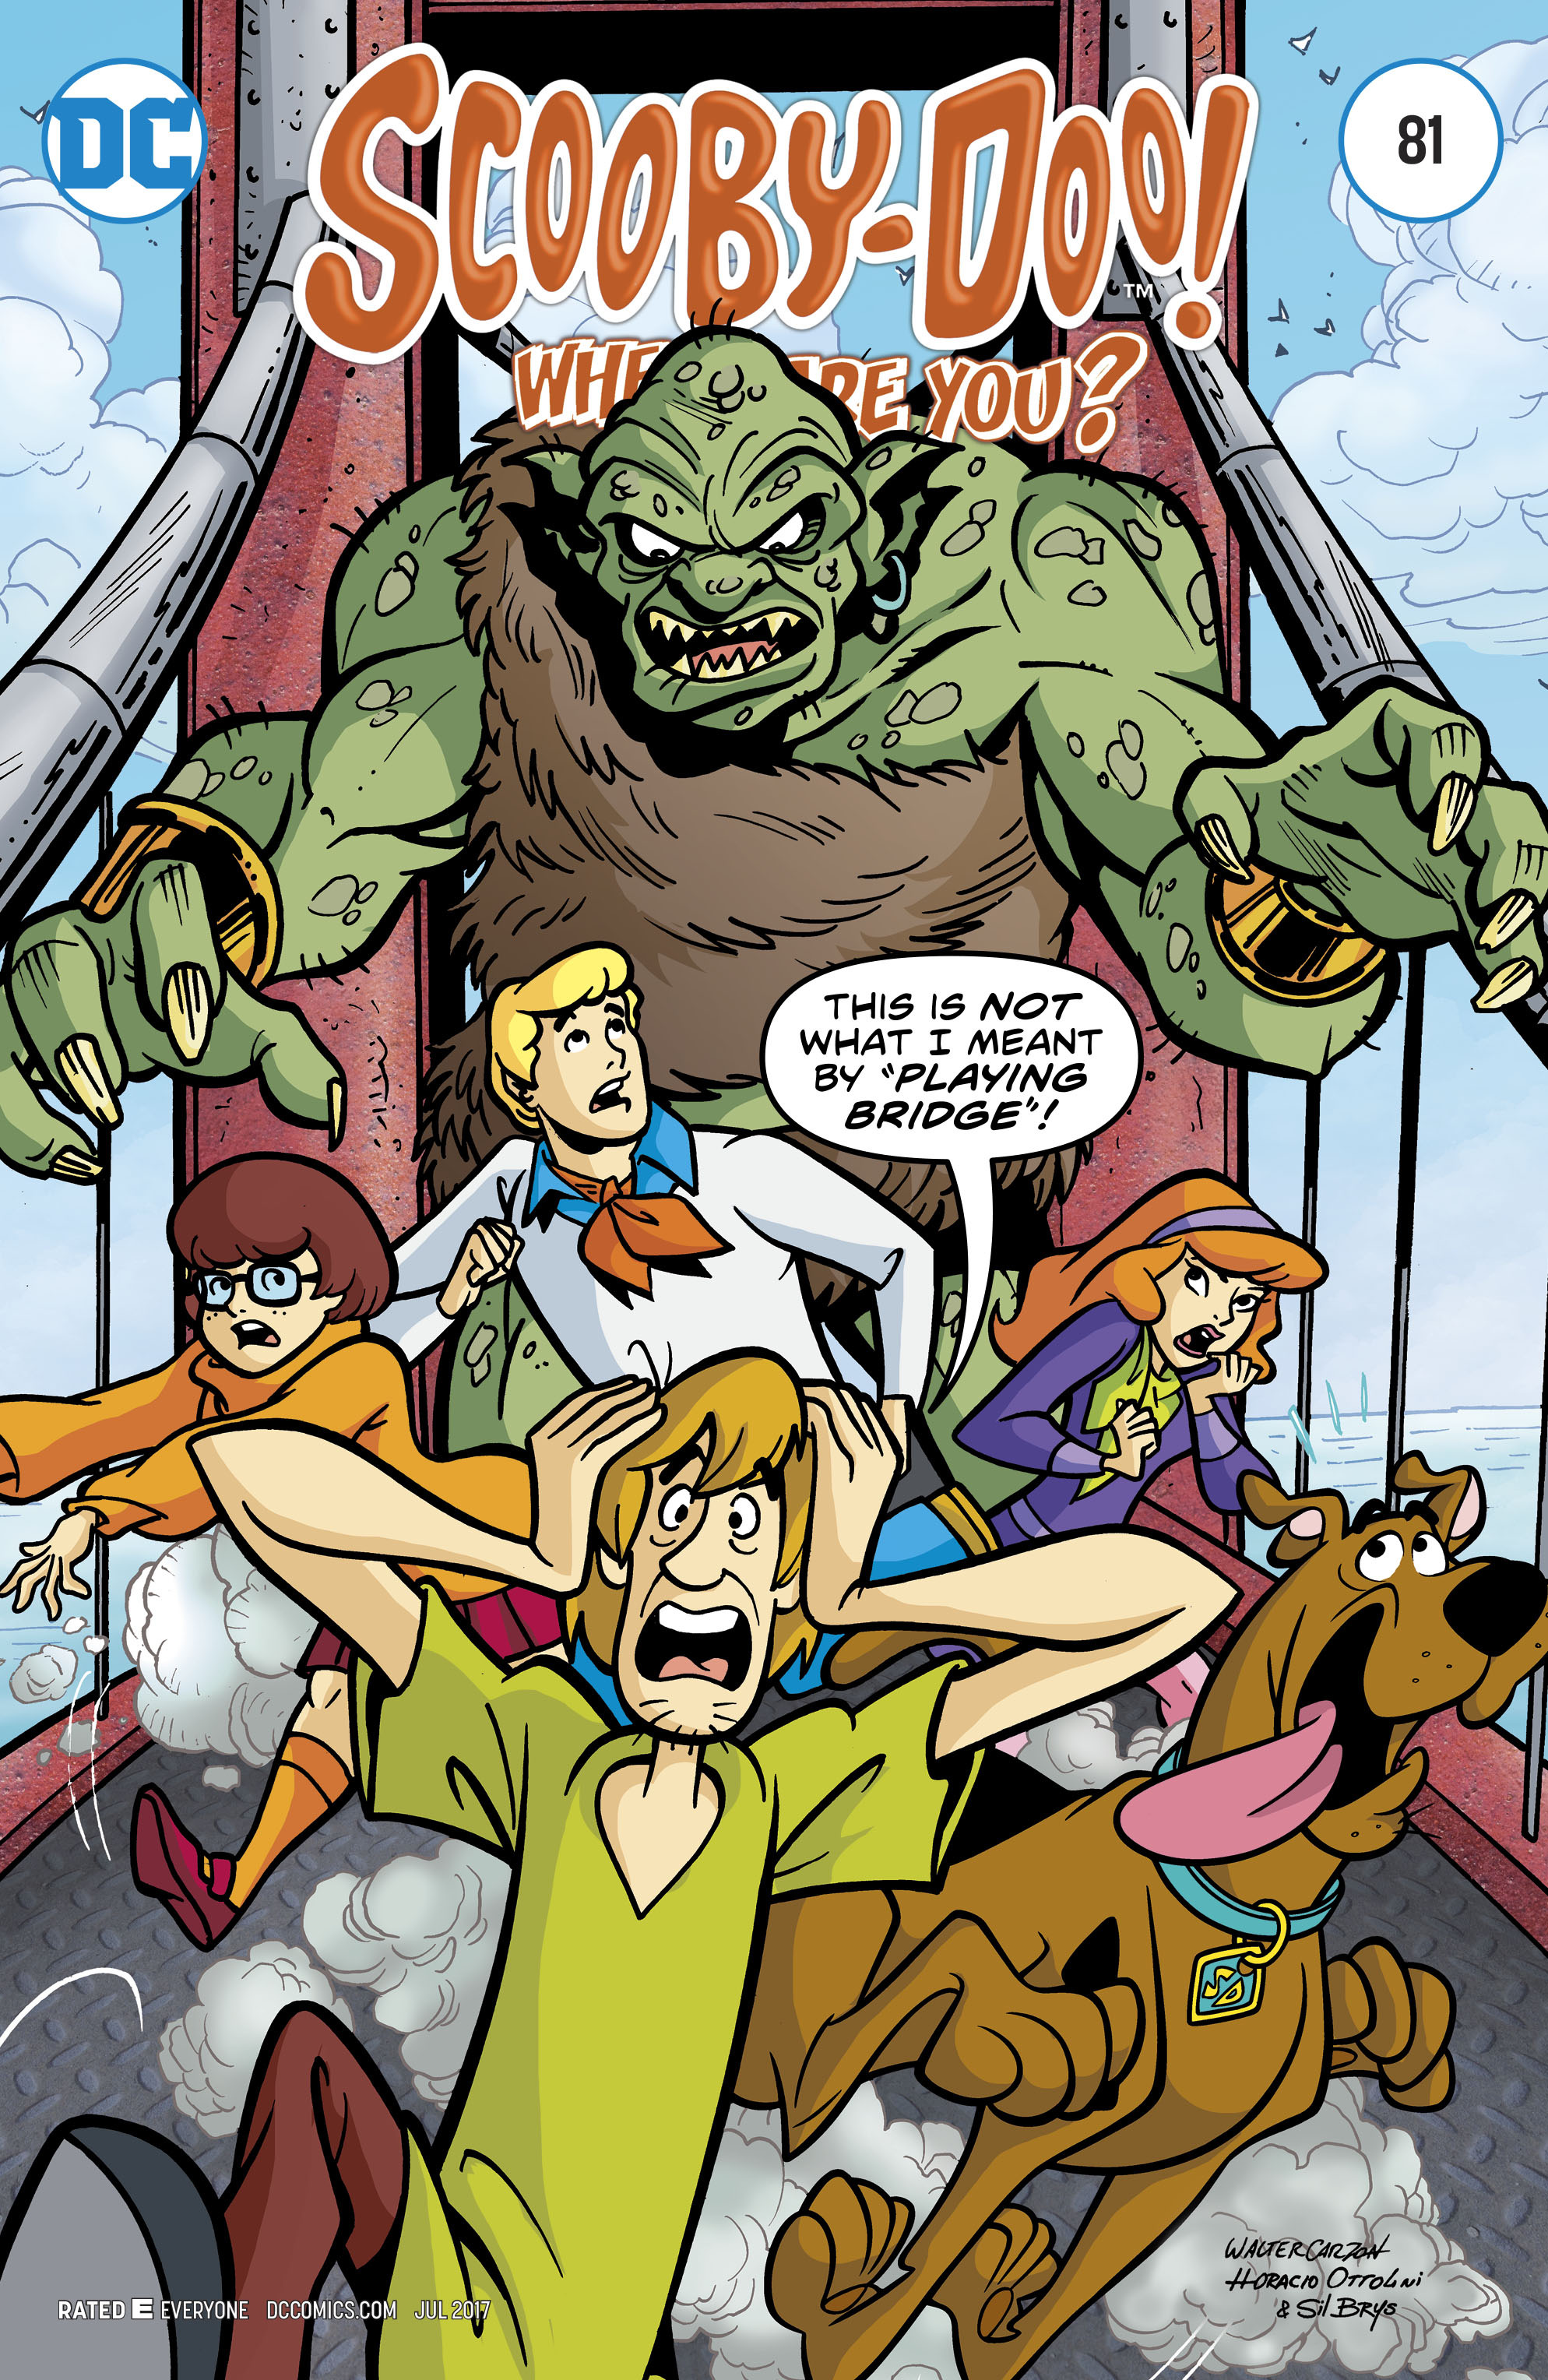 Scooby-Doo, Where Are You? (2010-): Chapter 81 - Page 1